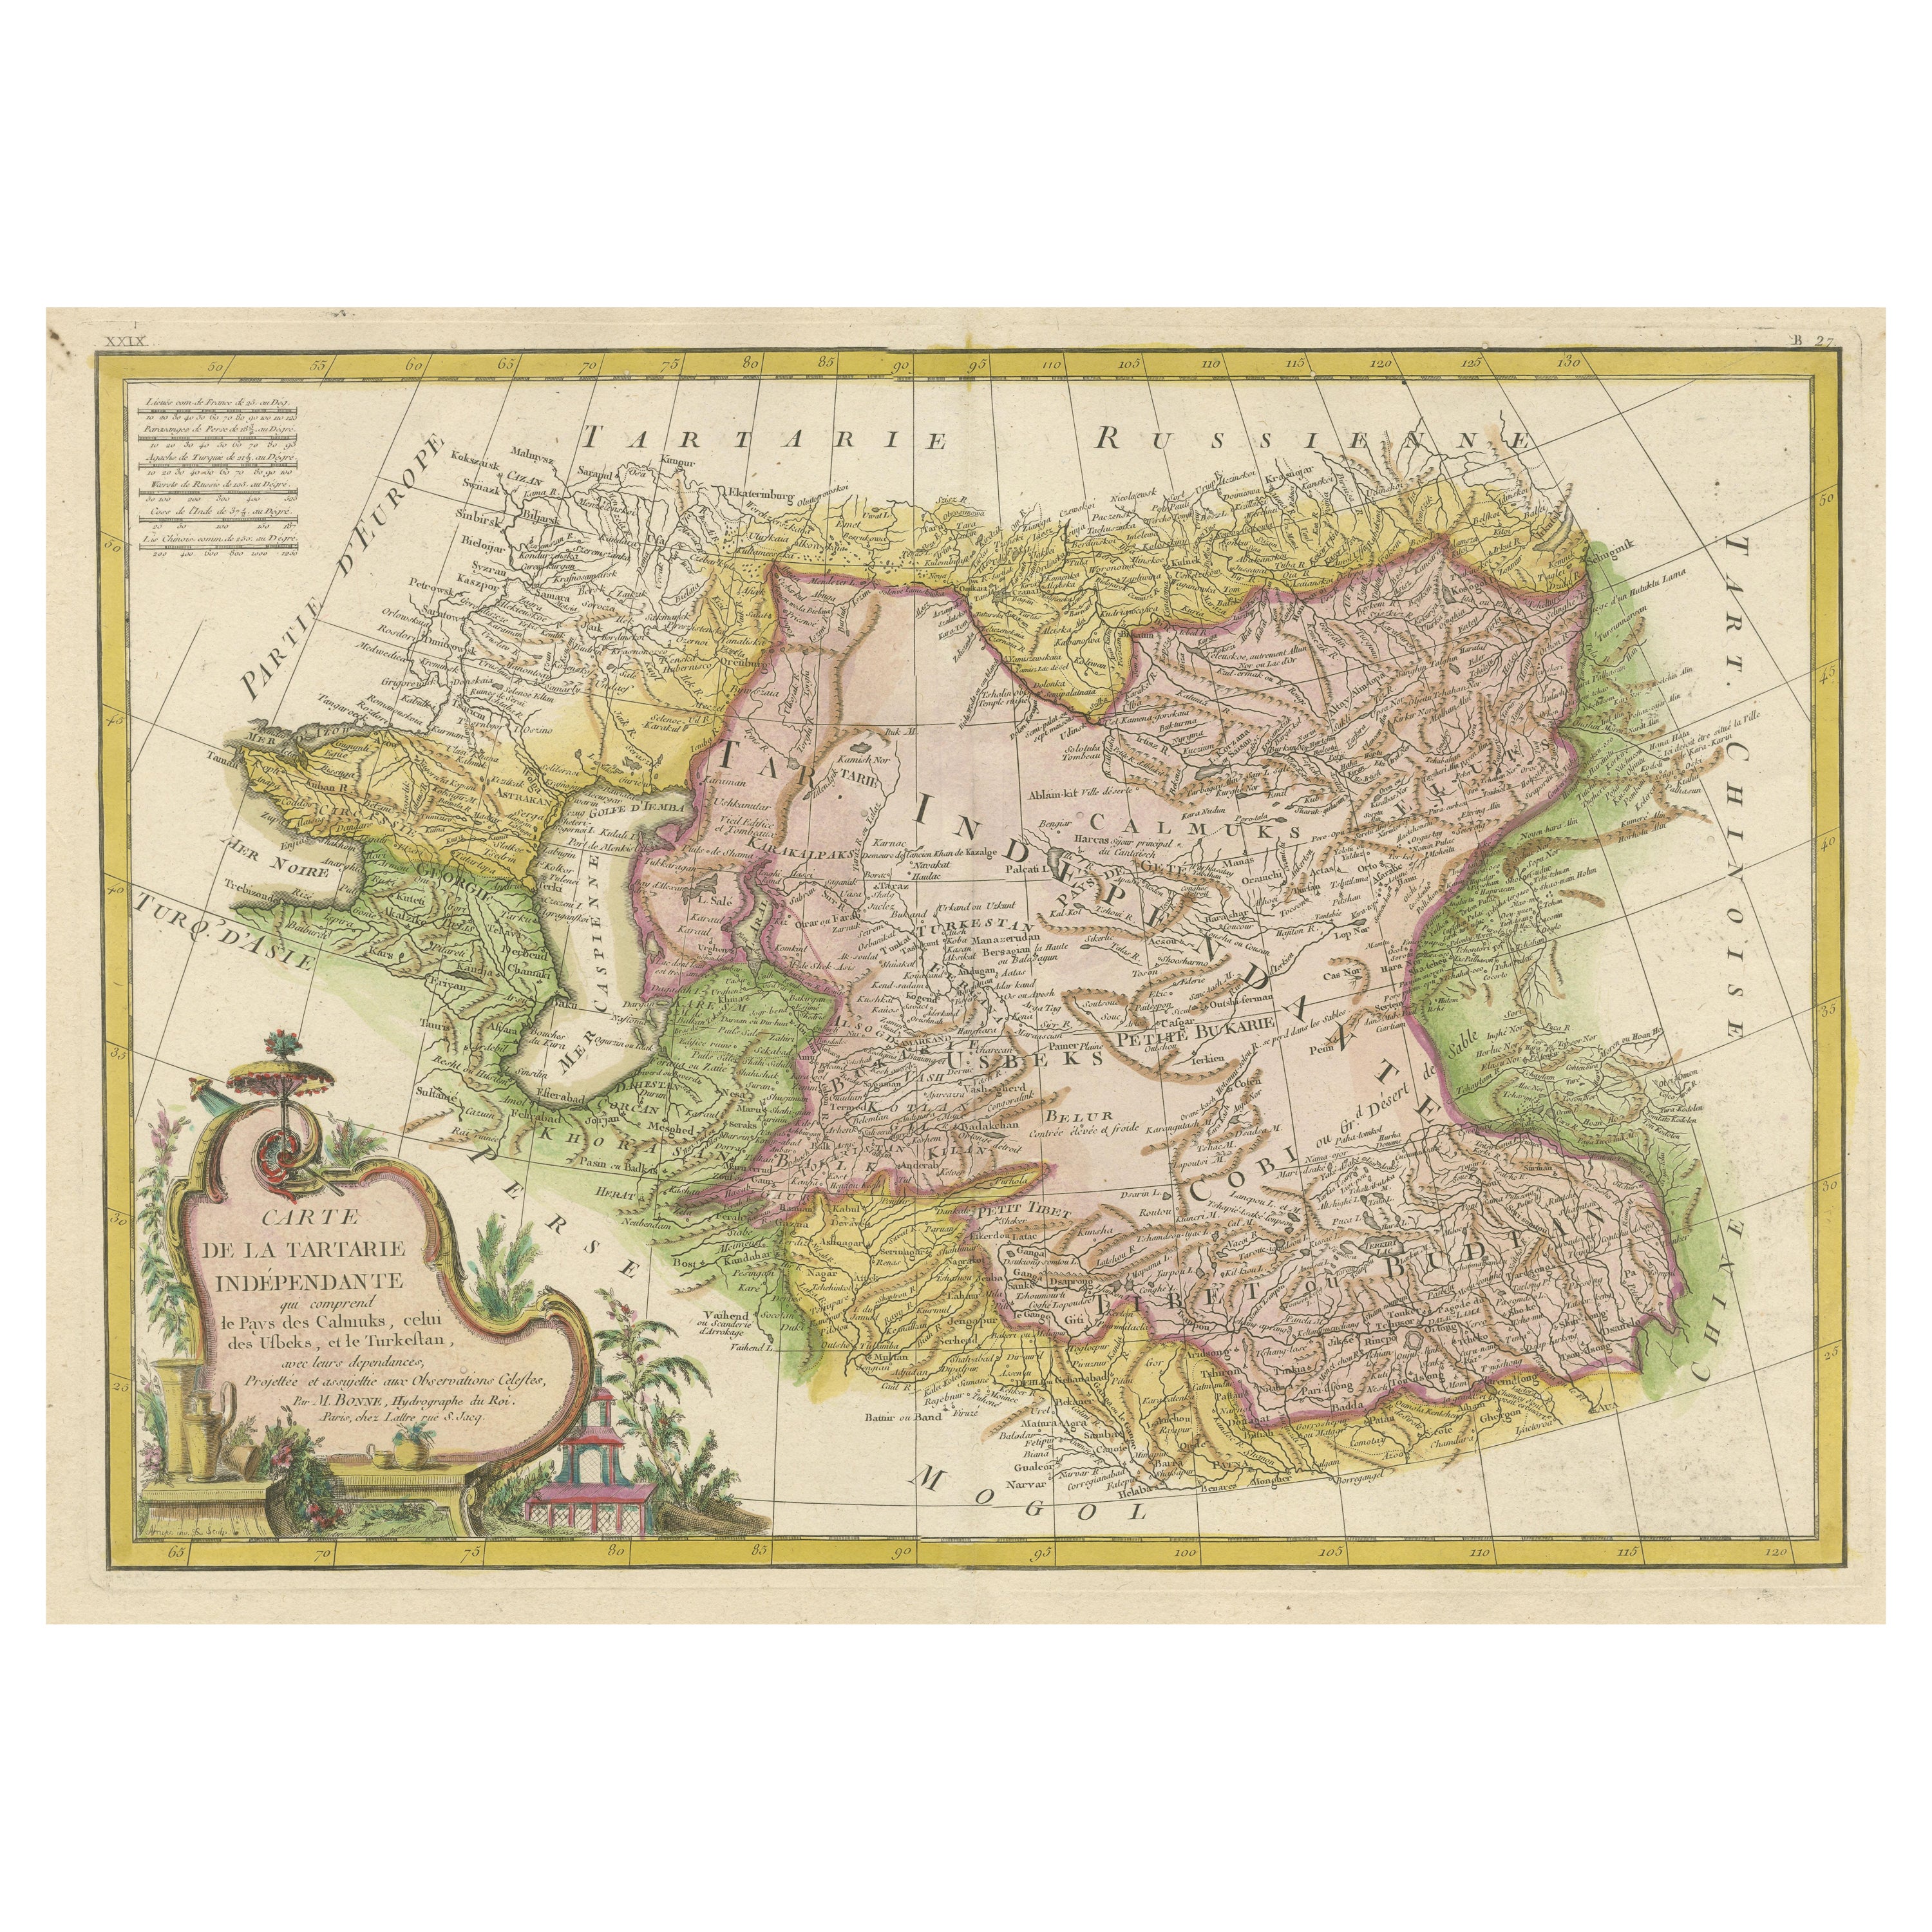 Decorative Antique Map of Central Asia